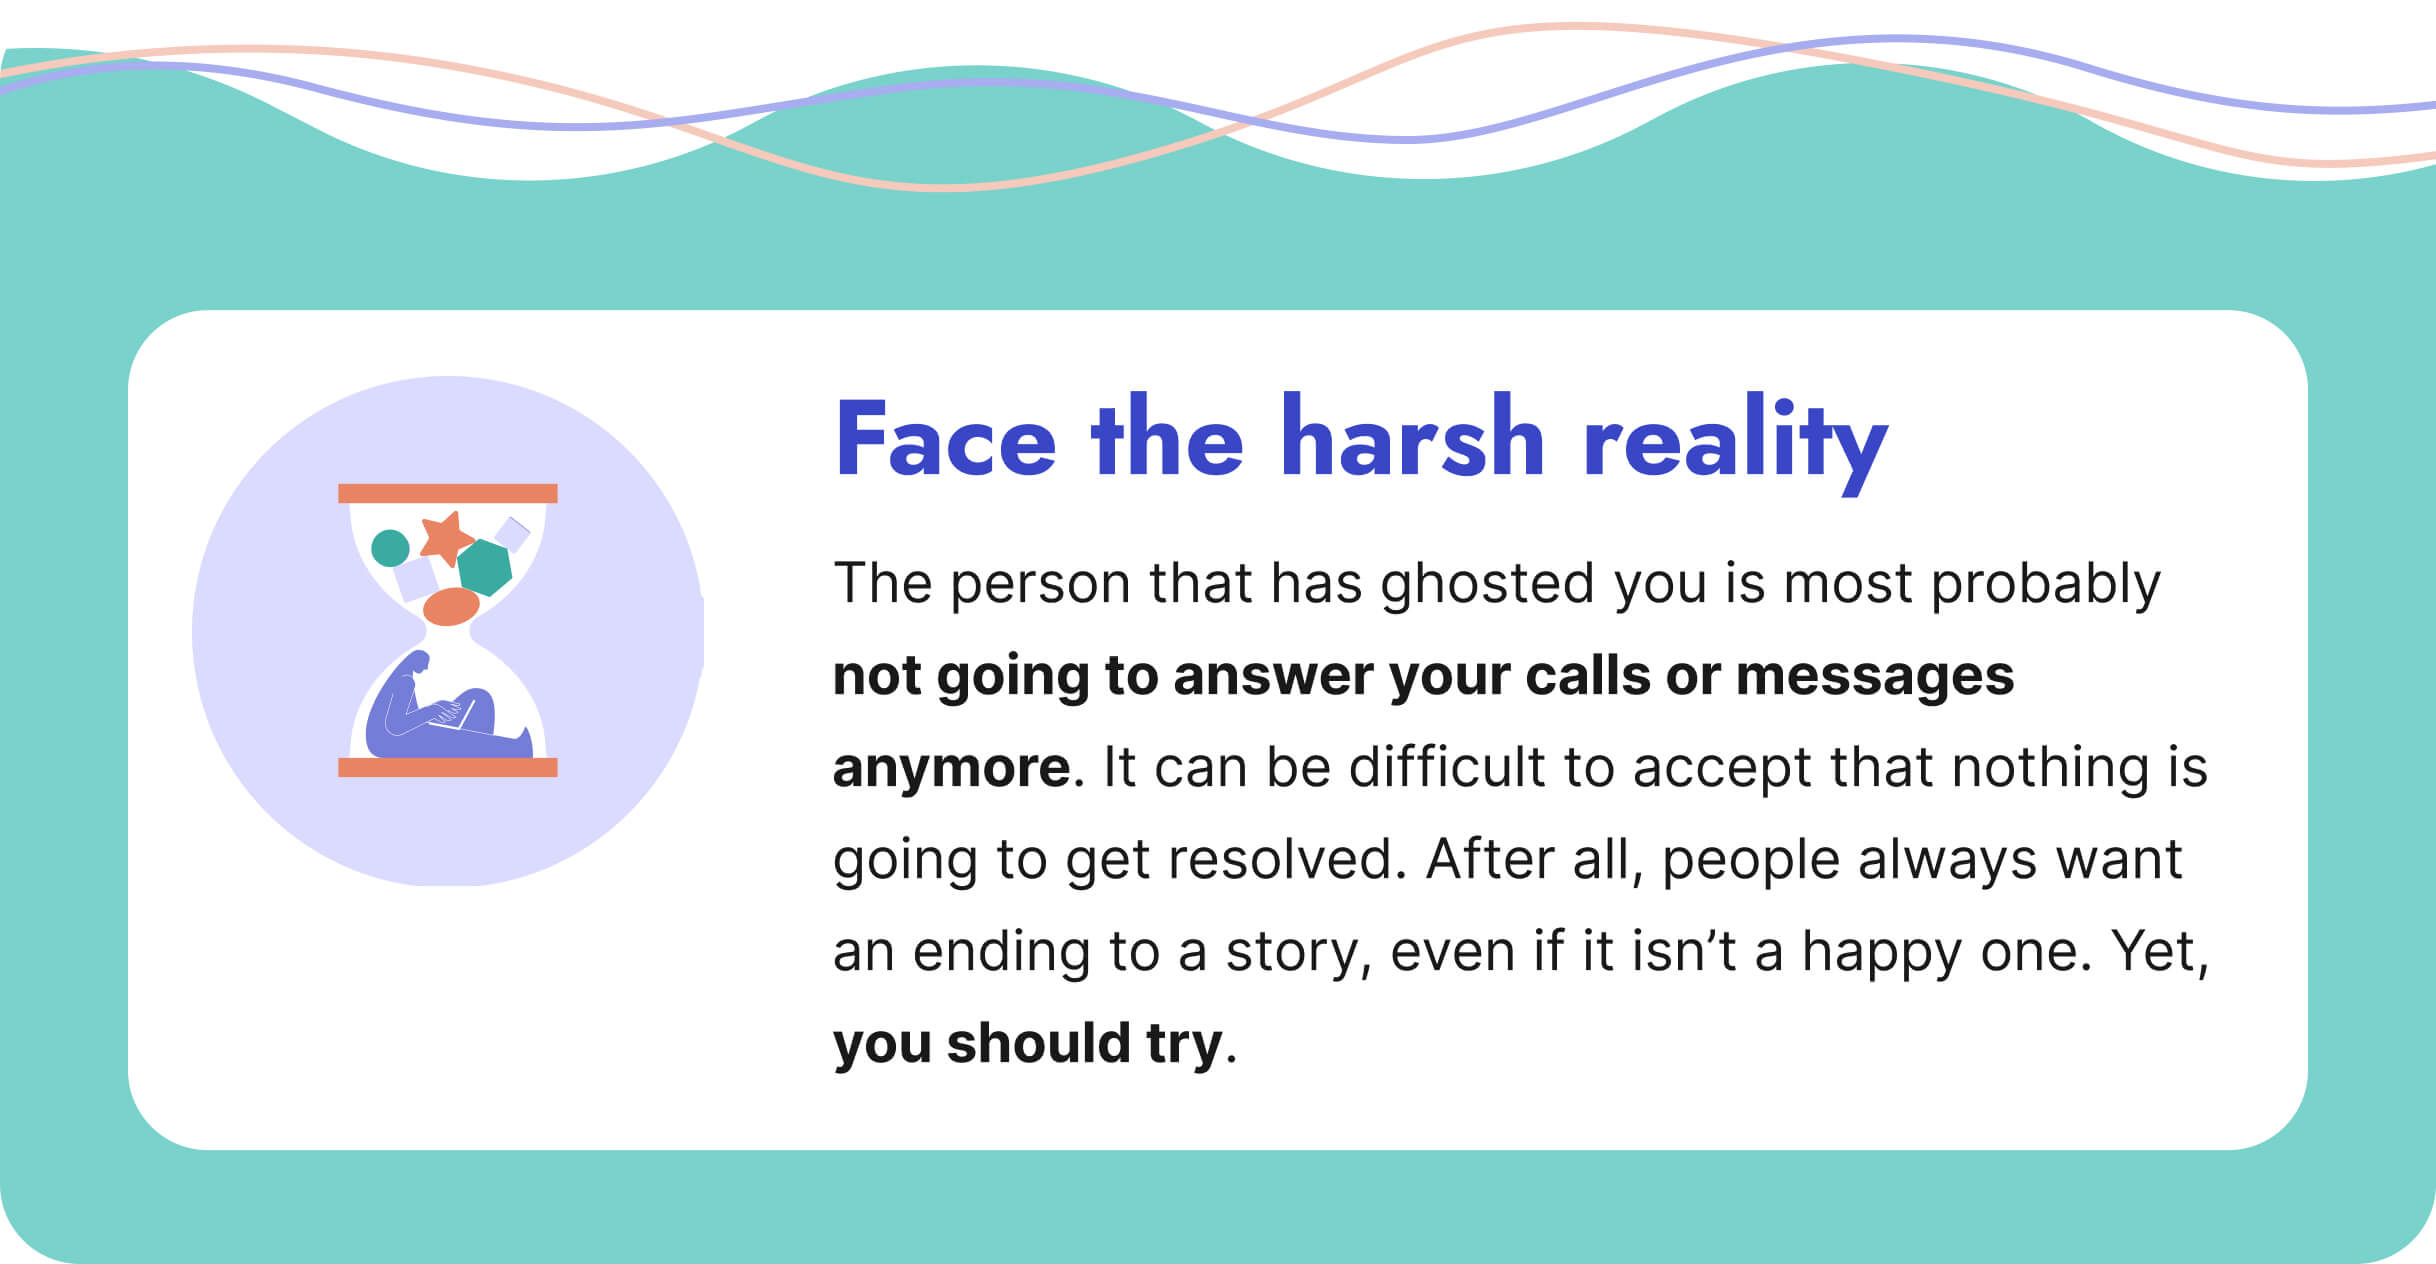 Face the harsh reality when it comes to ghosting.